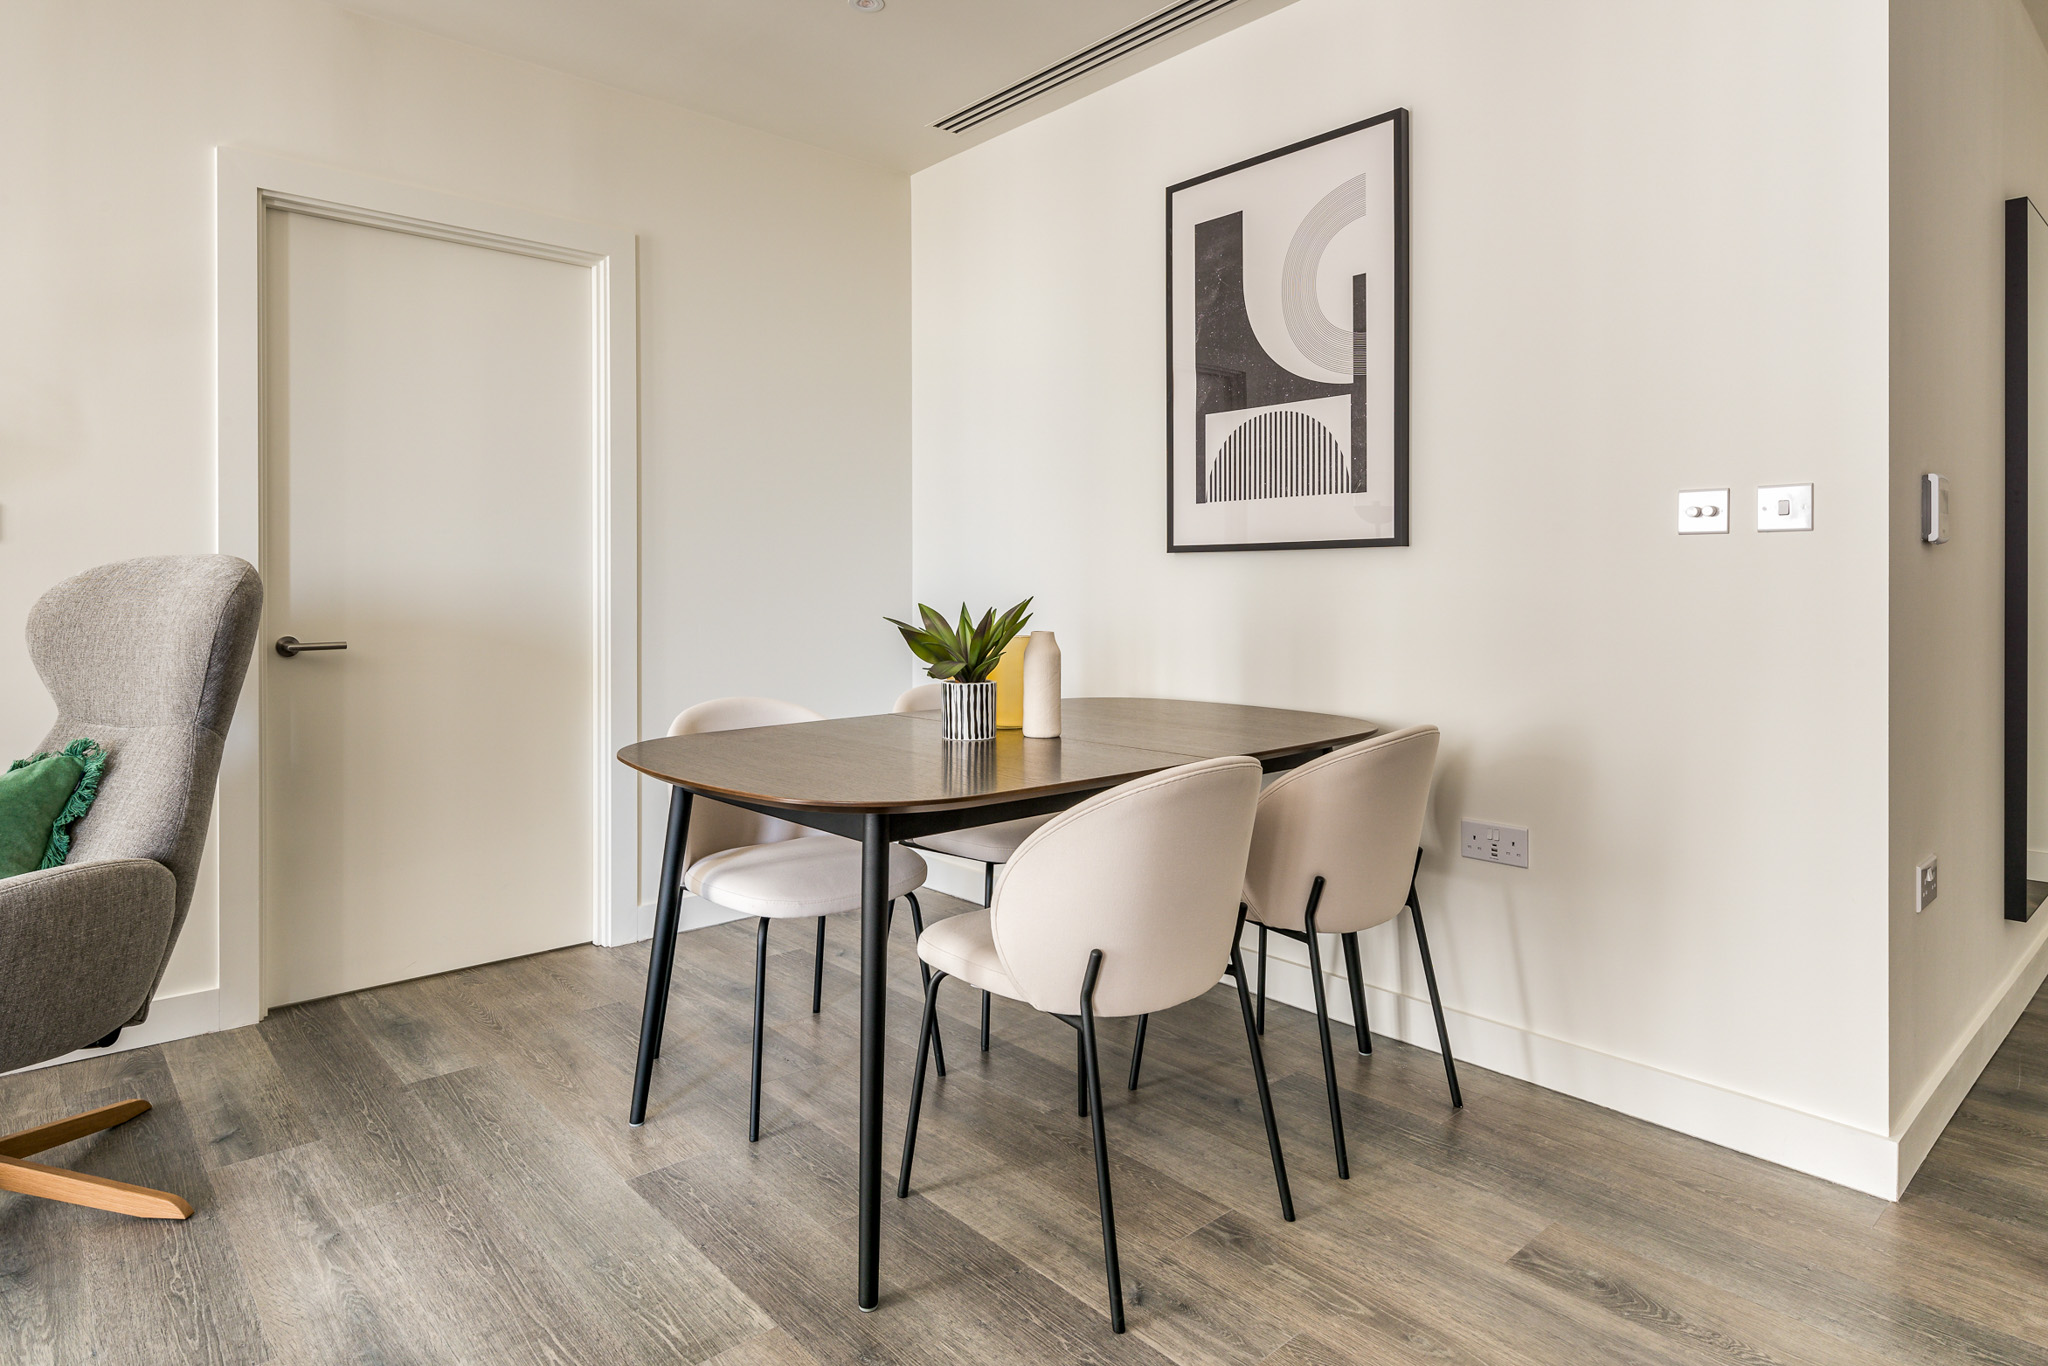 Dining Area - One Bedroom Apartment - Urban Rest - East Village Apartments - London